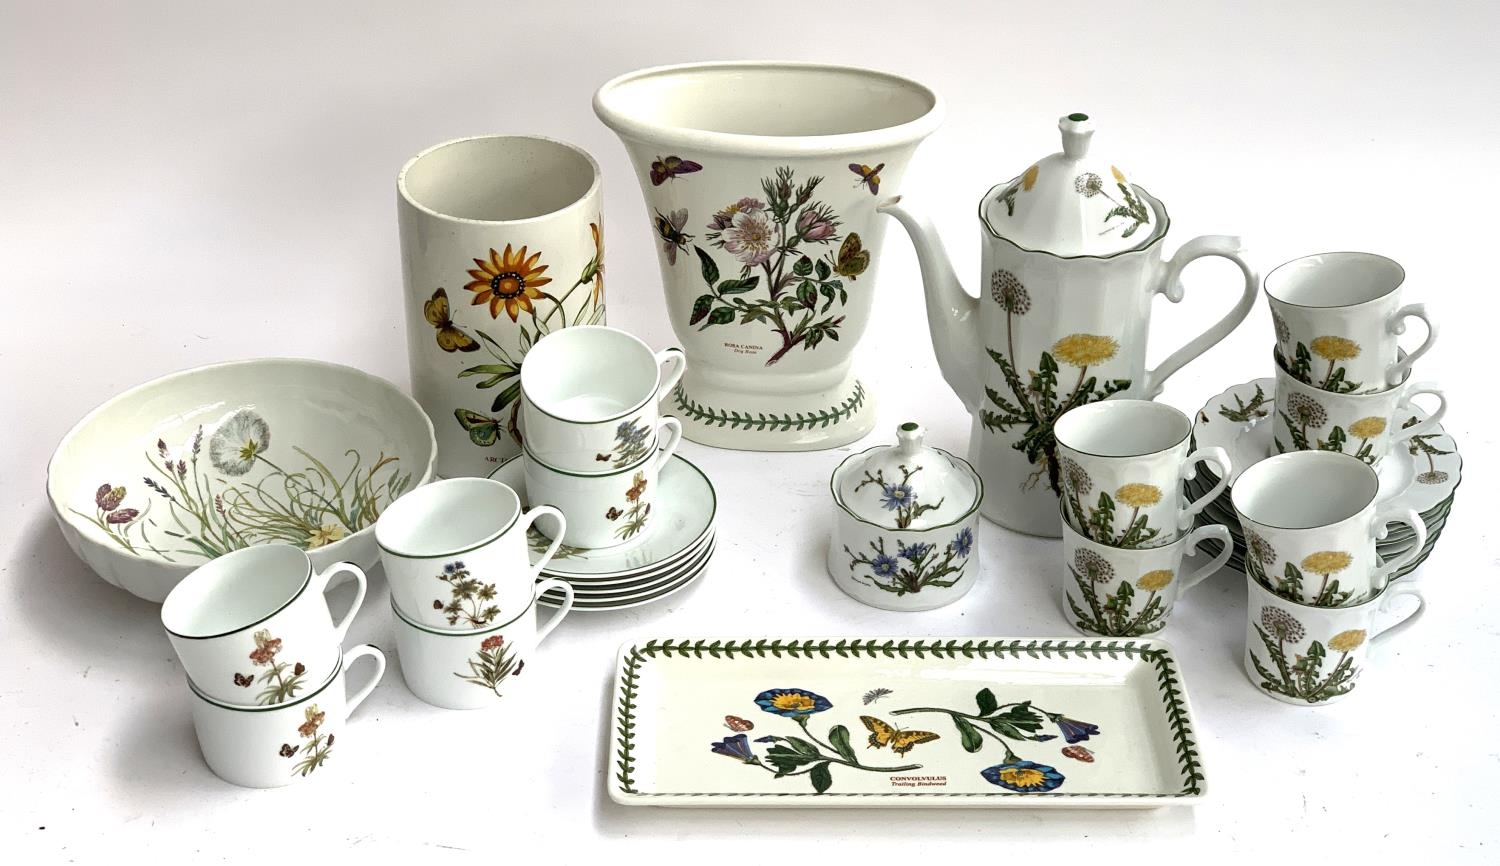 An Eschenbach Bavaria part coffee service with dandelion design (15 pieces); together with Limoges